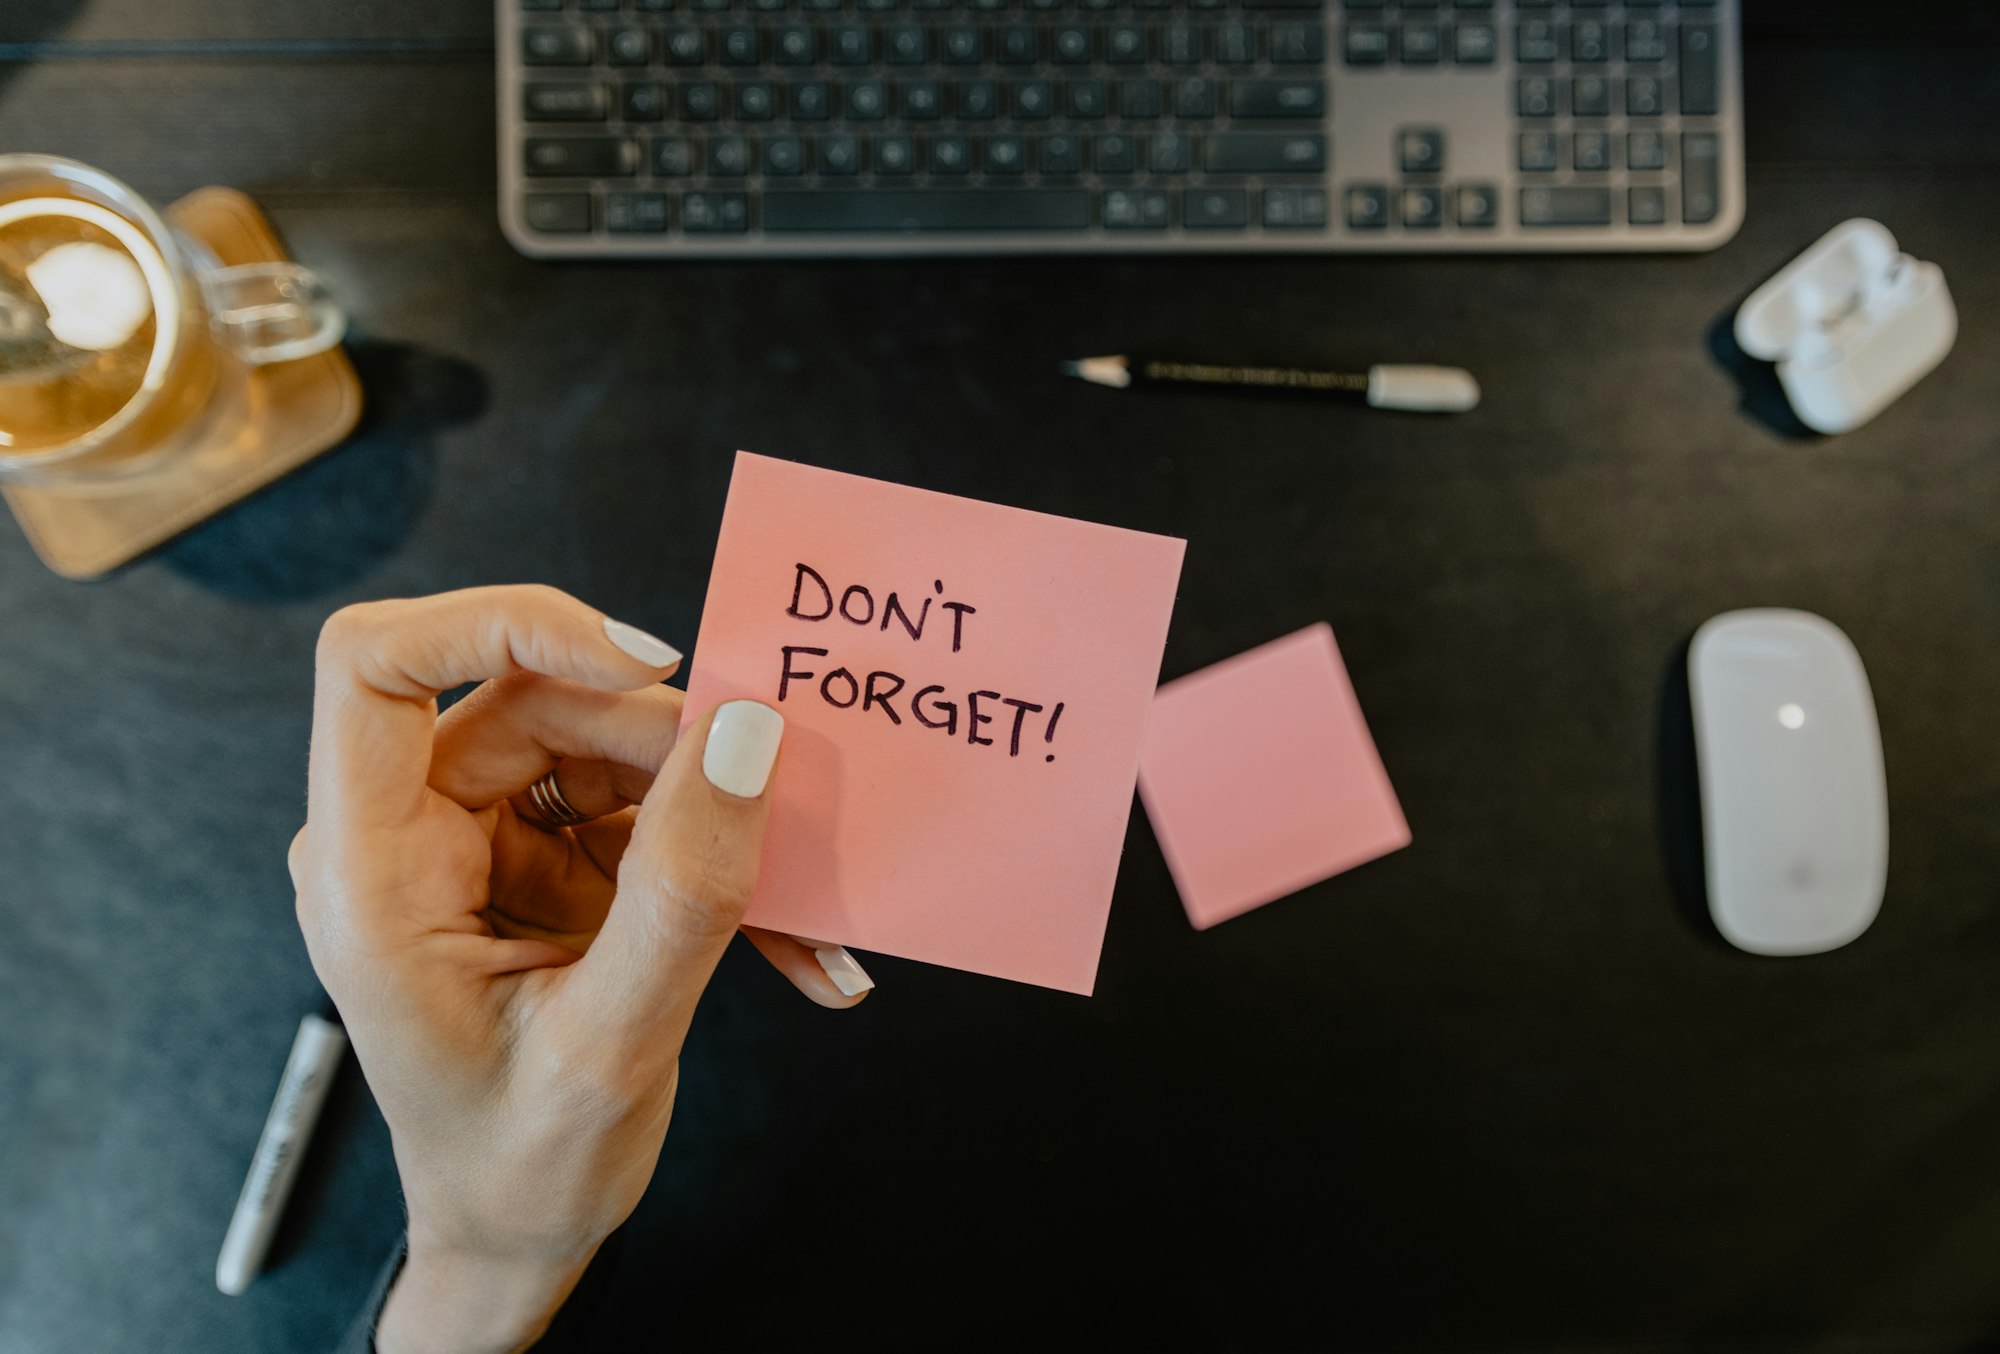 Sticky note reminder "Don't forget"